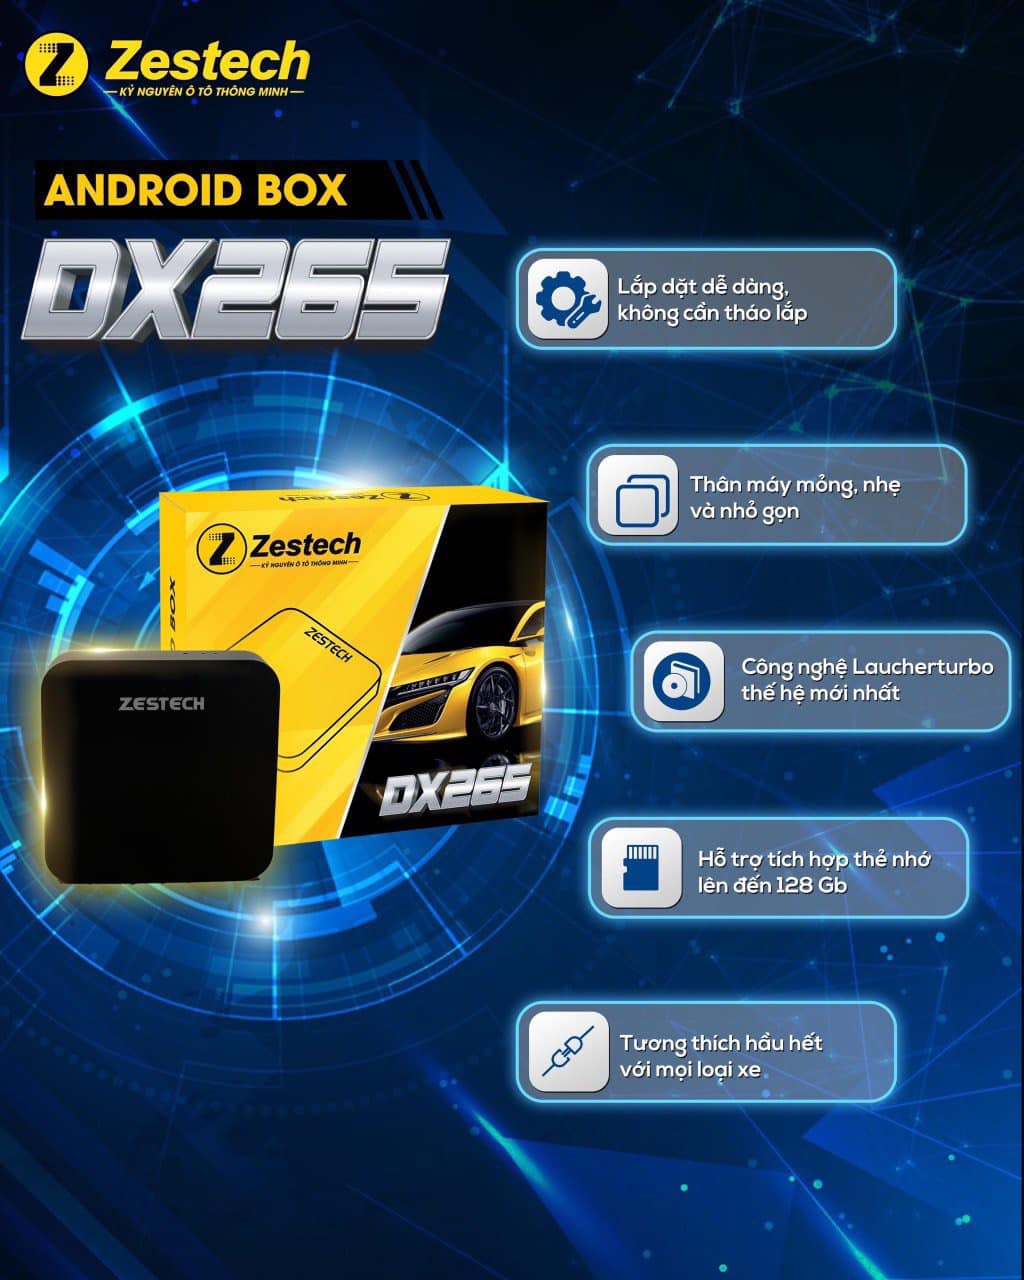 Android box zestech dx265